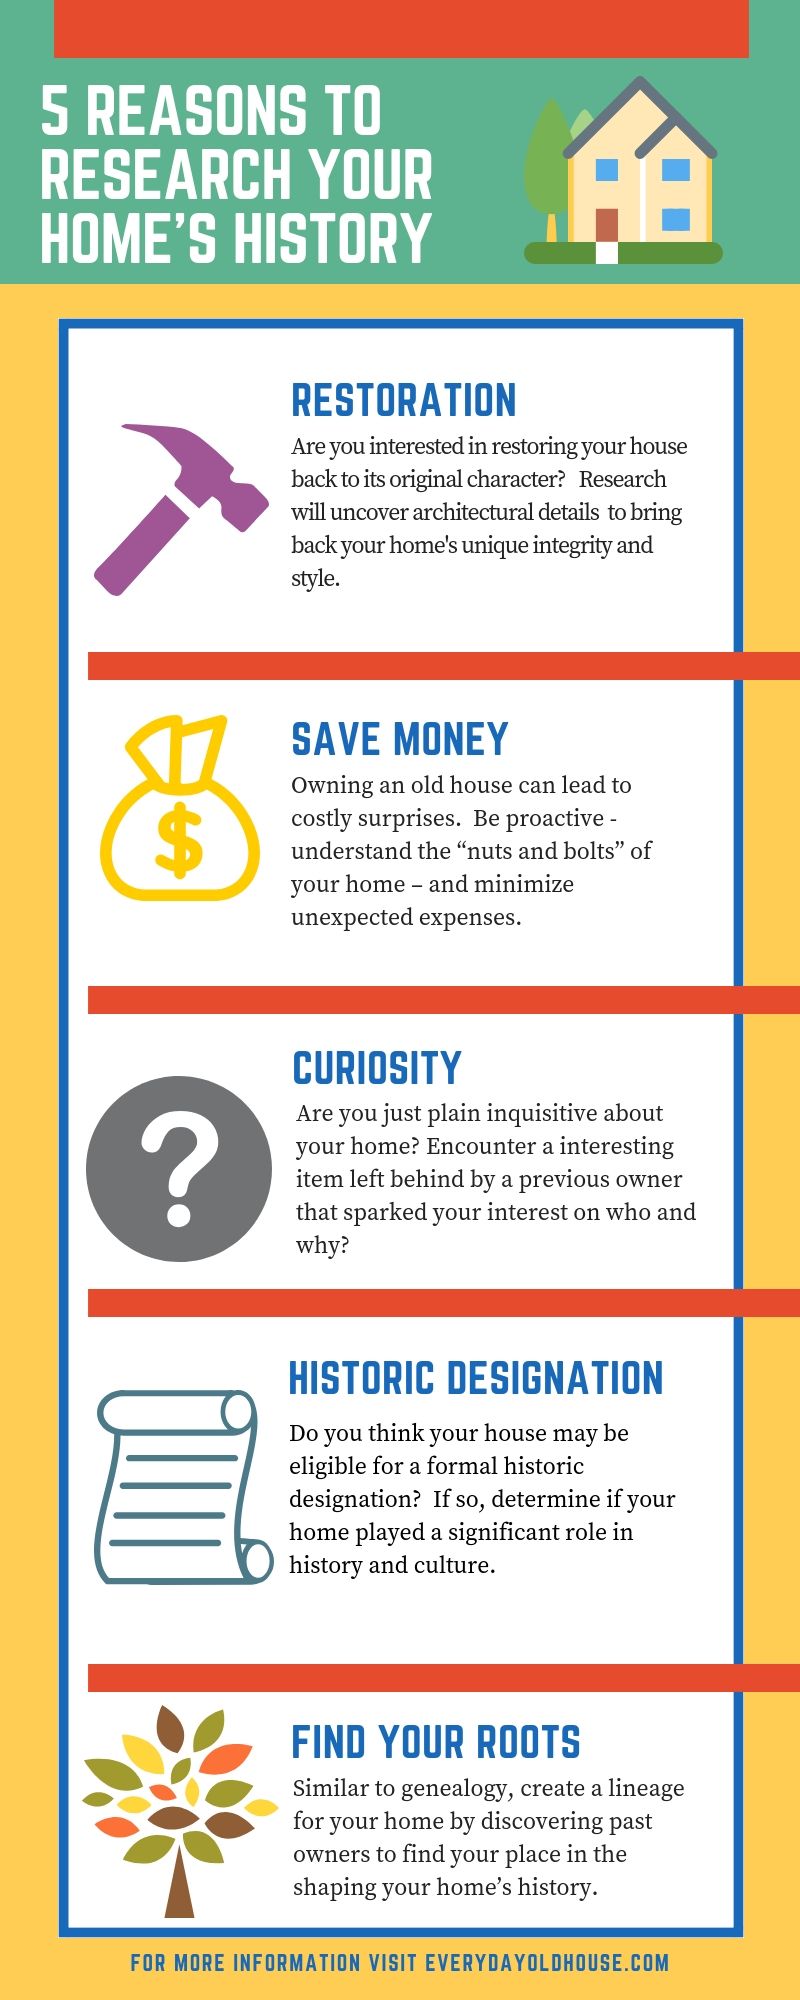 5 Reasons to Research Your Home's History #househistory #residentialinfograph #howtoresearchyourhome #oldhouse